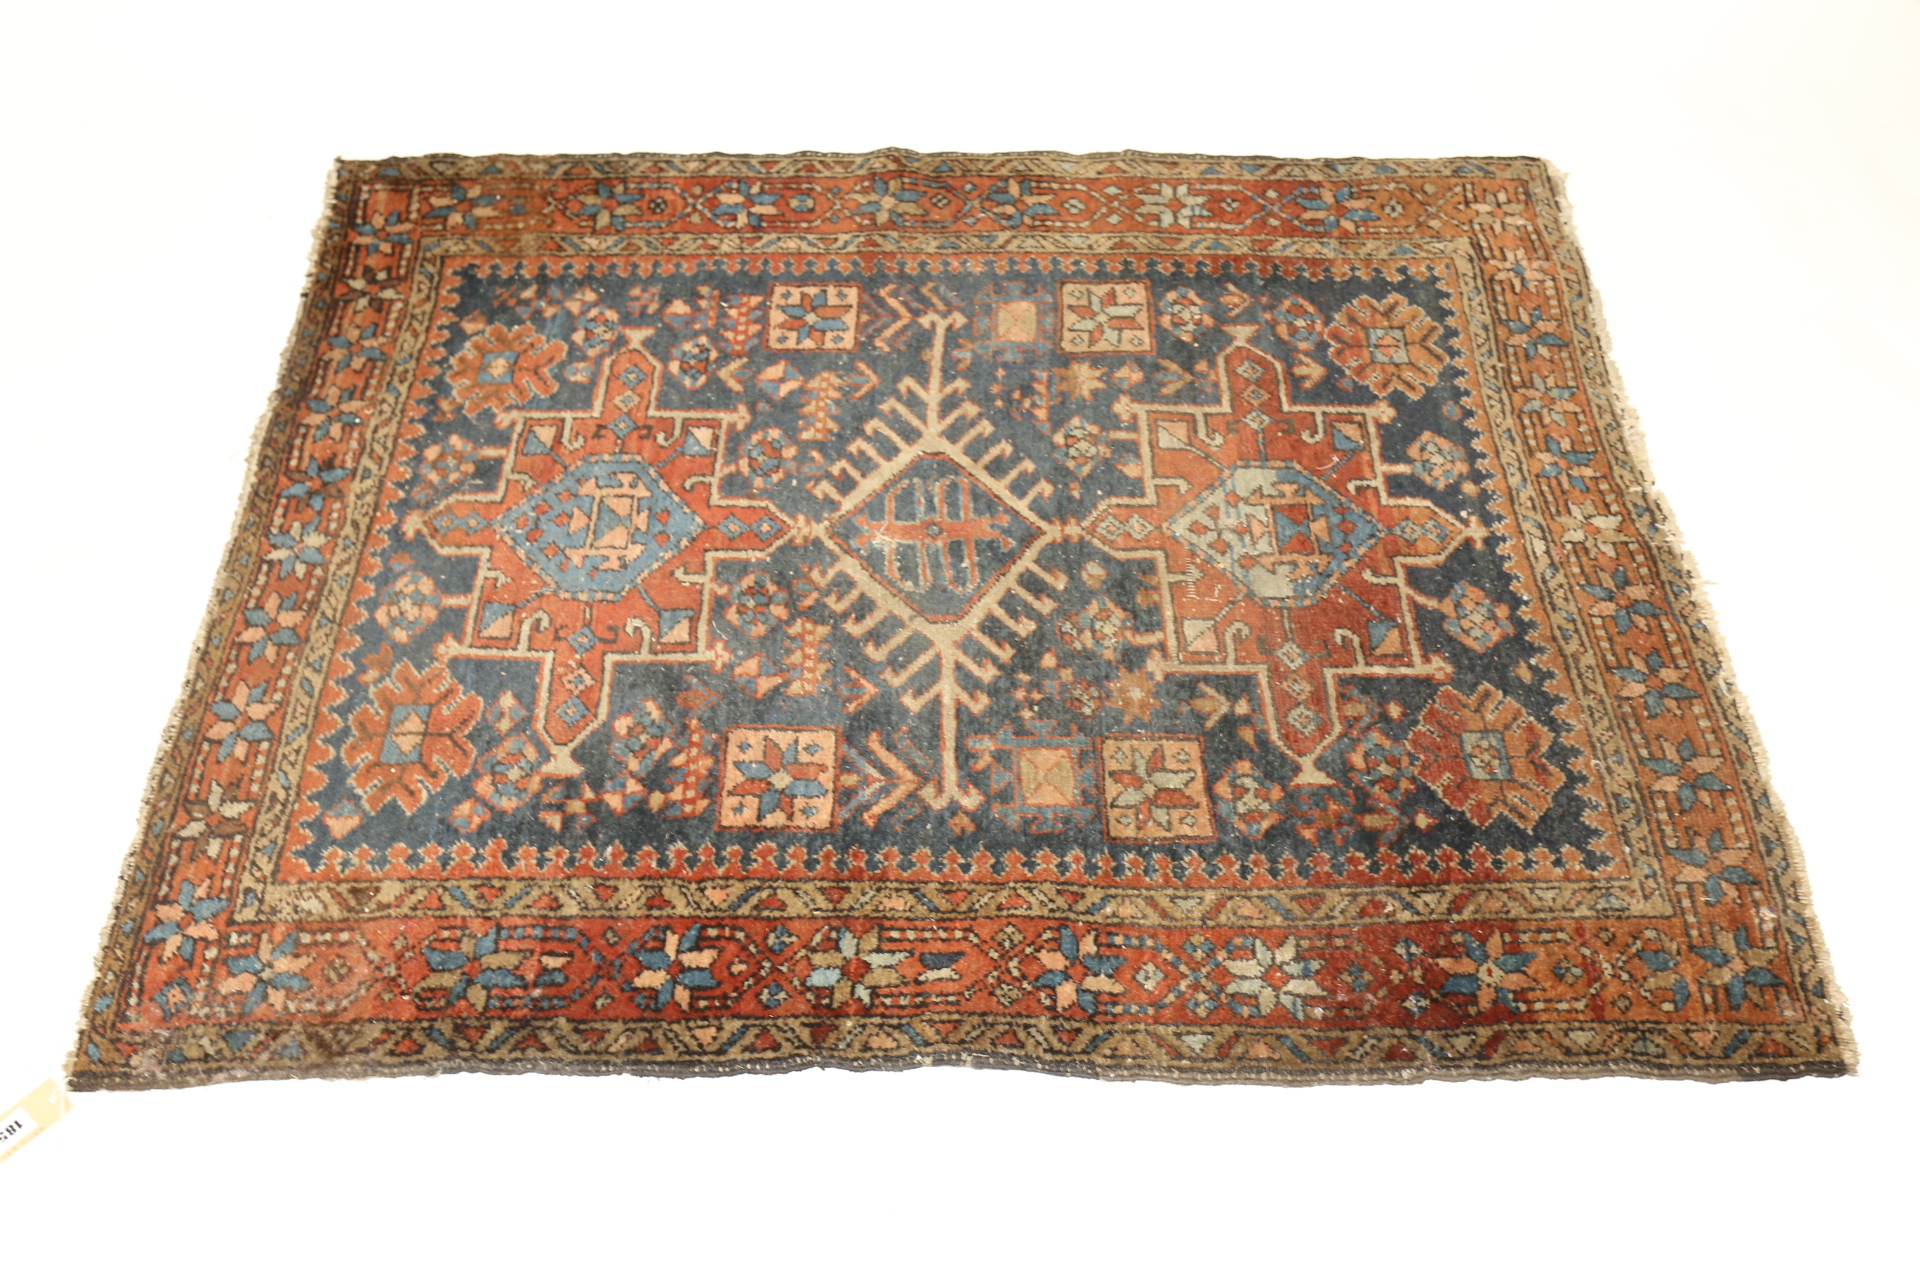 AN EARLY 20TH CENTURY CAUCASIAN RUG, blue ground with central latch-key diamond & three outer